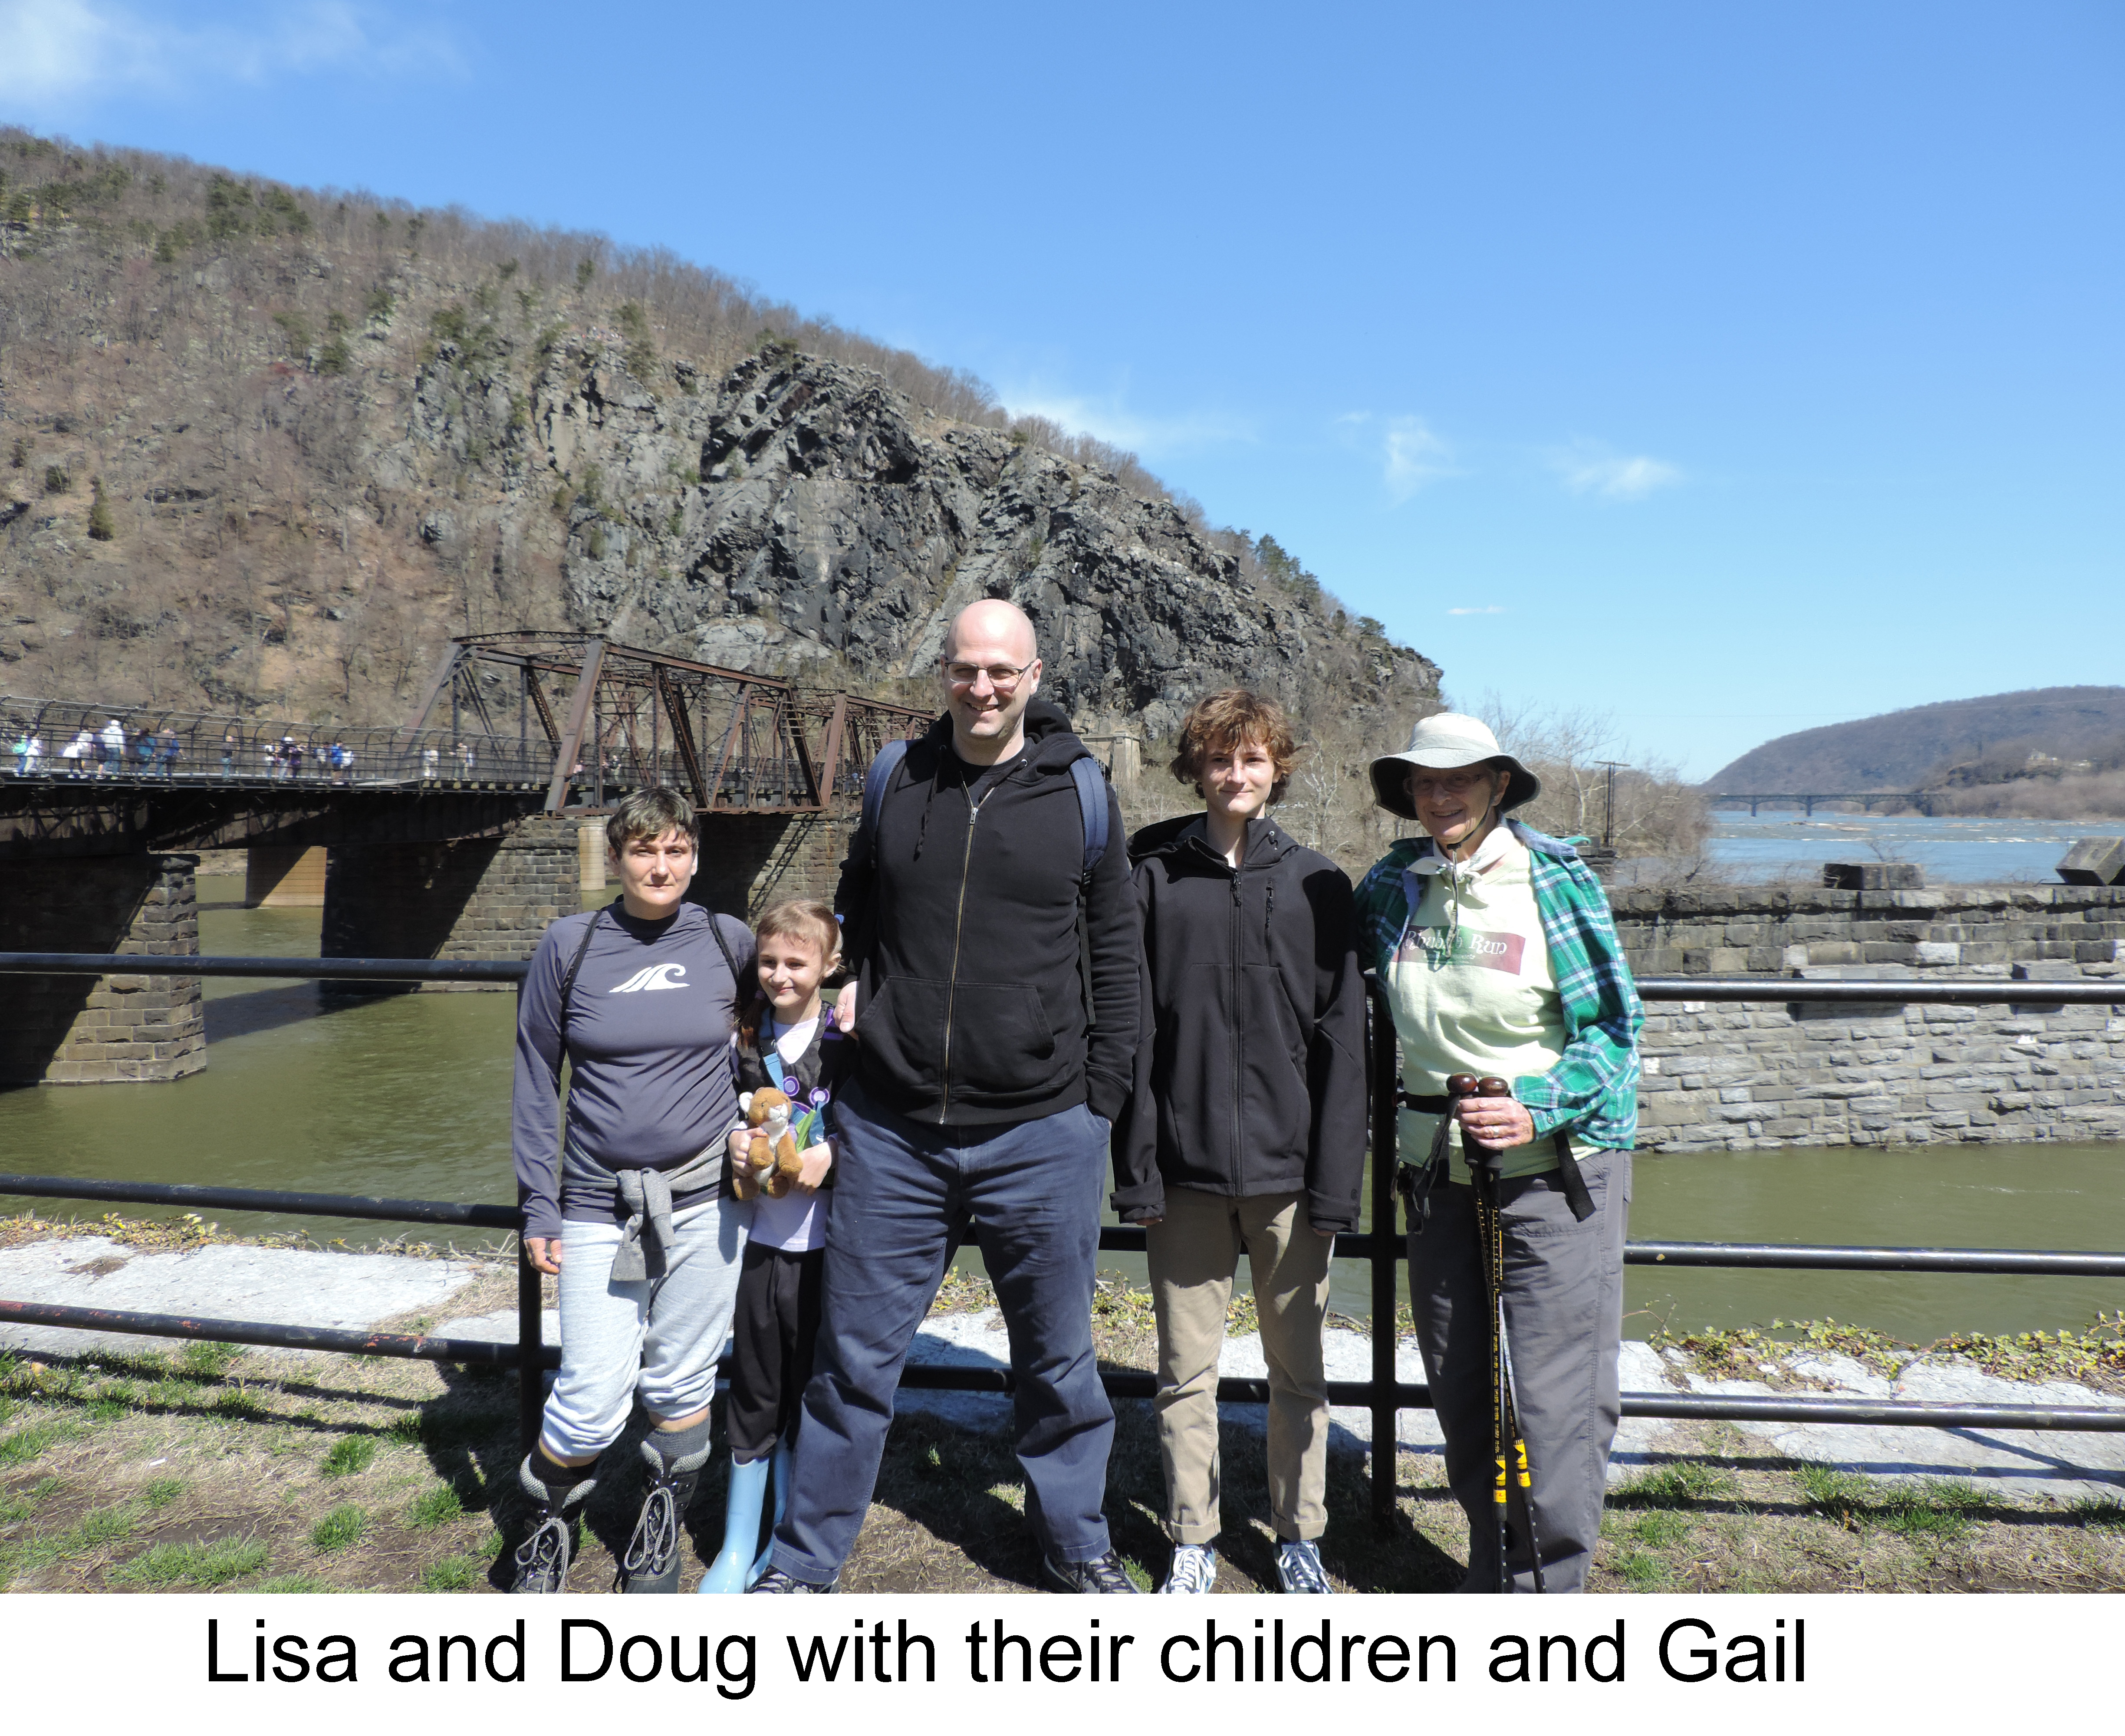 The family is standing in front of the river on a sunny day.      People are walking across the footbridge on the left. 